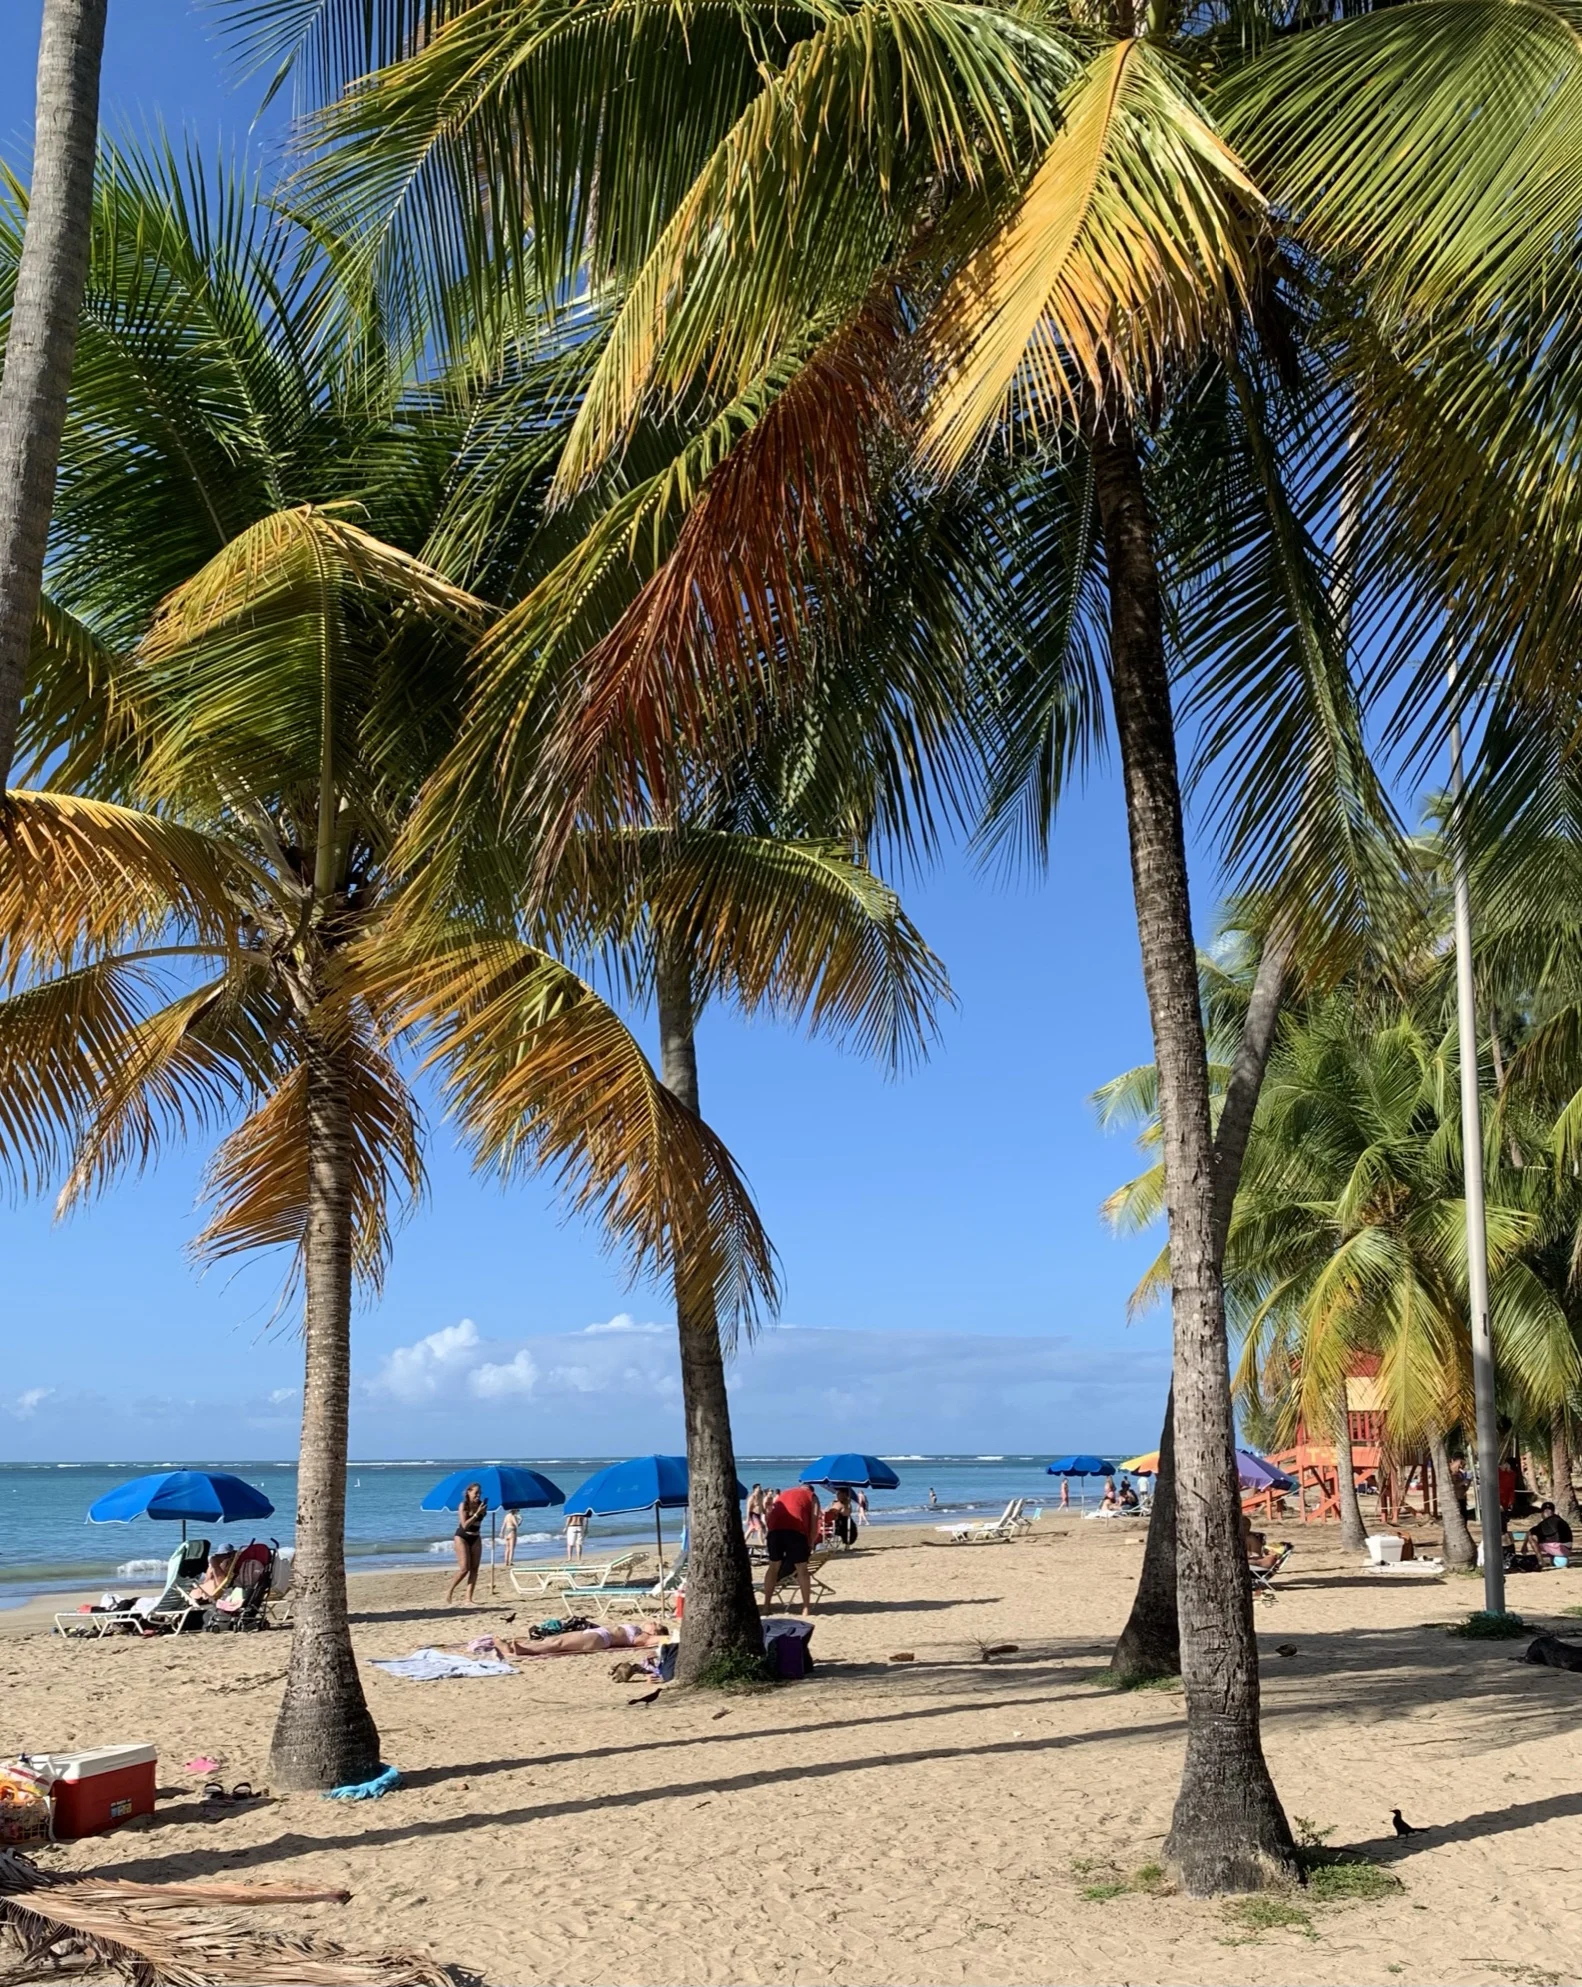 luquillo beach with palm trees